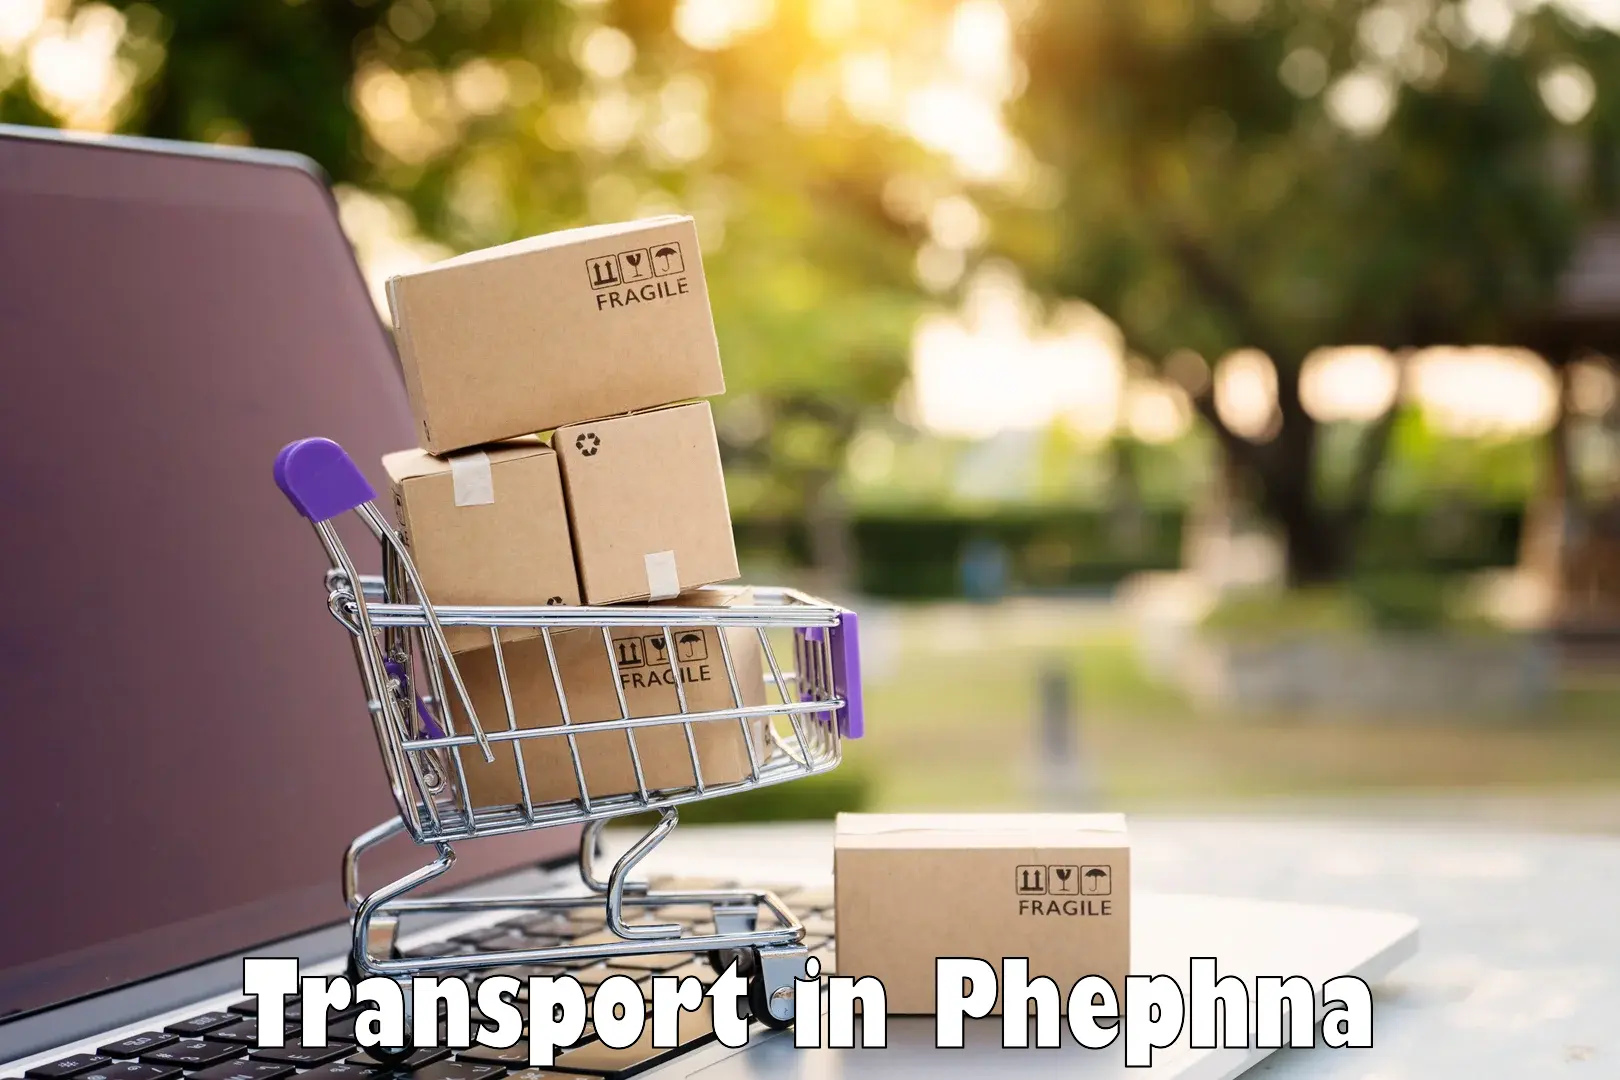 Transport shared services in Phephna